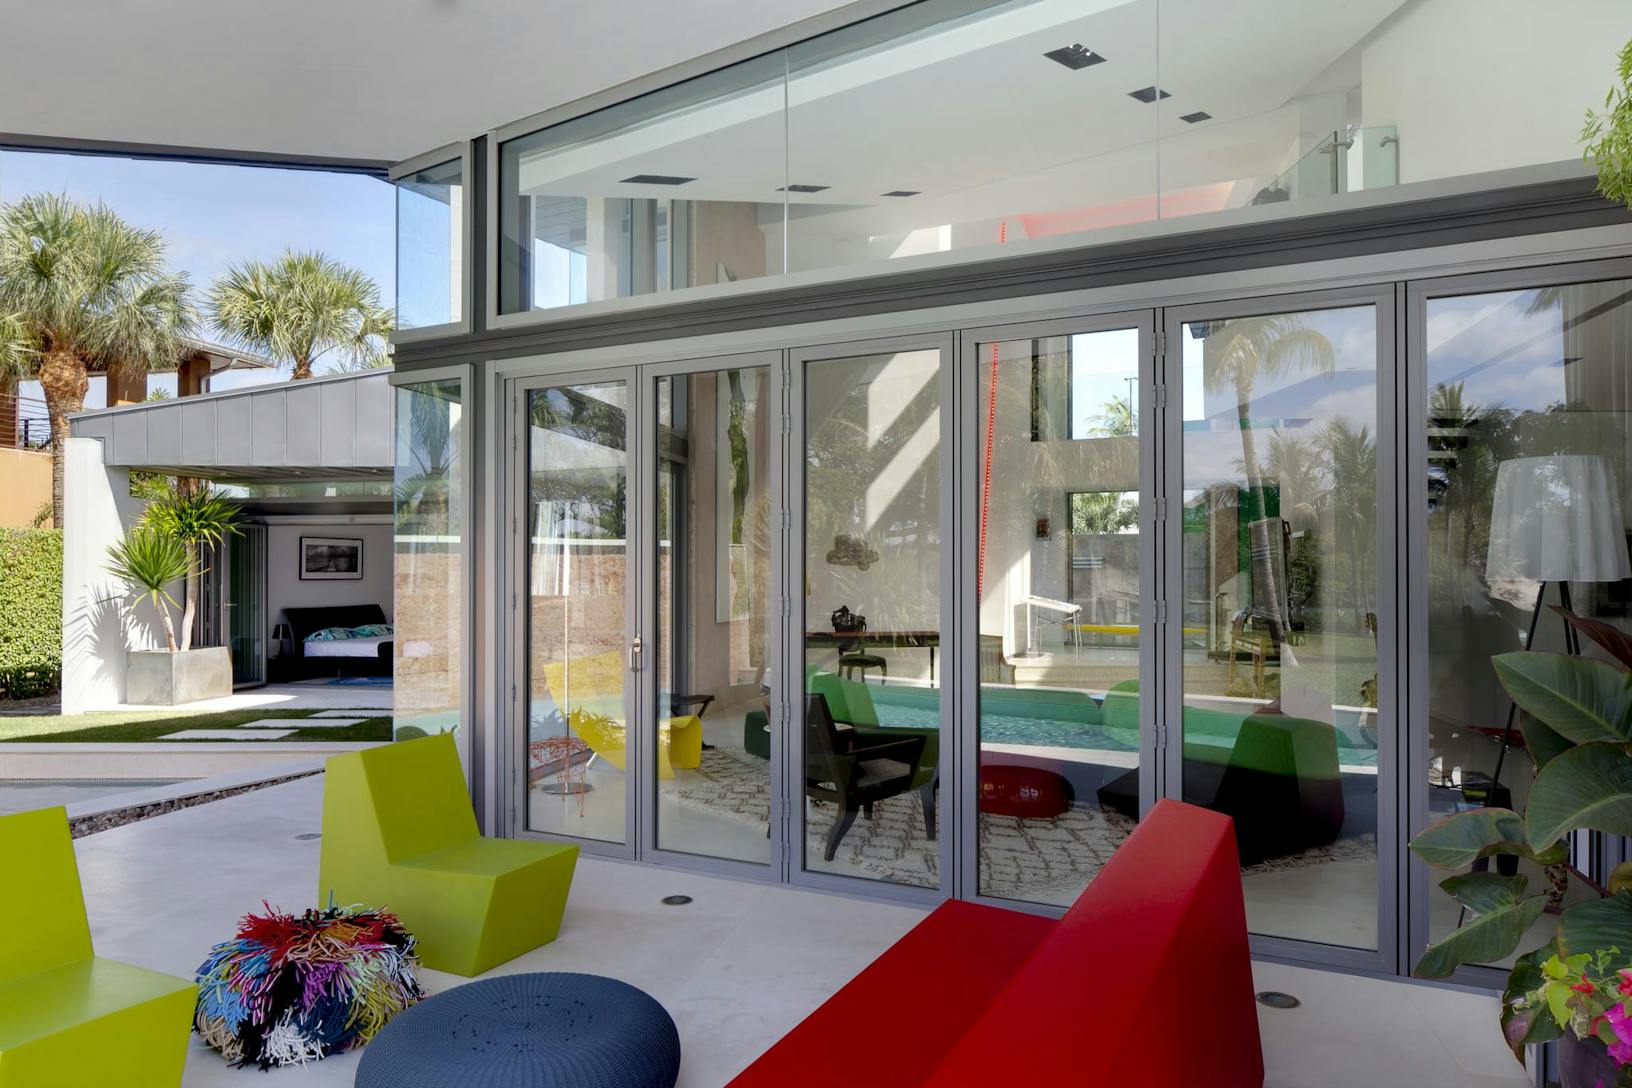 SL73  impact-rated opening glass walls - Opening exterior glass walls